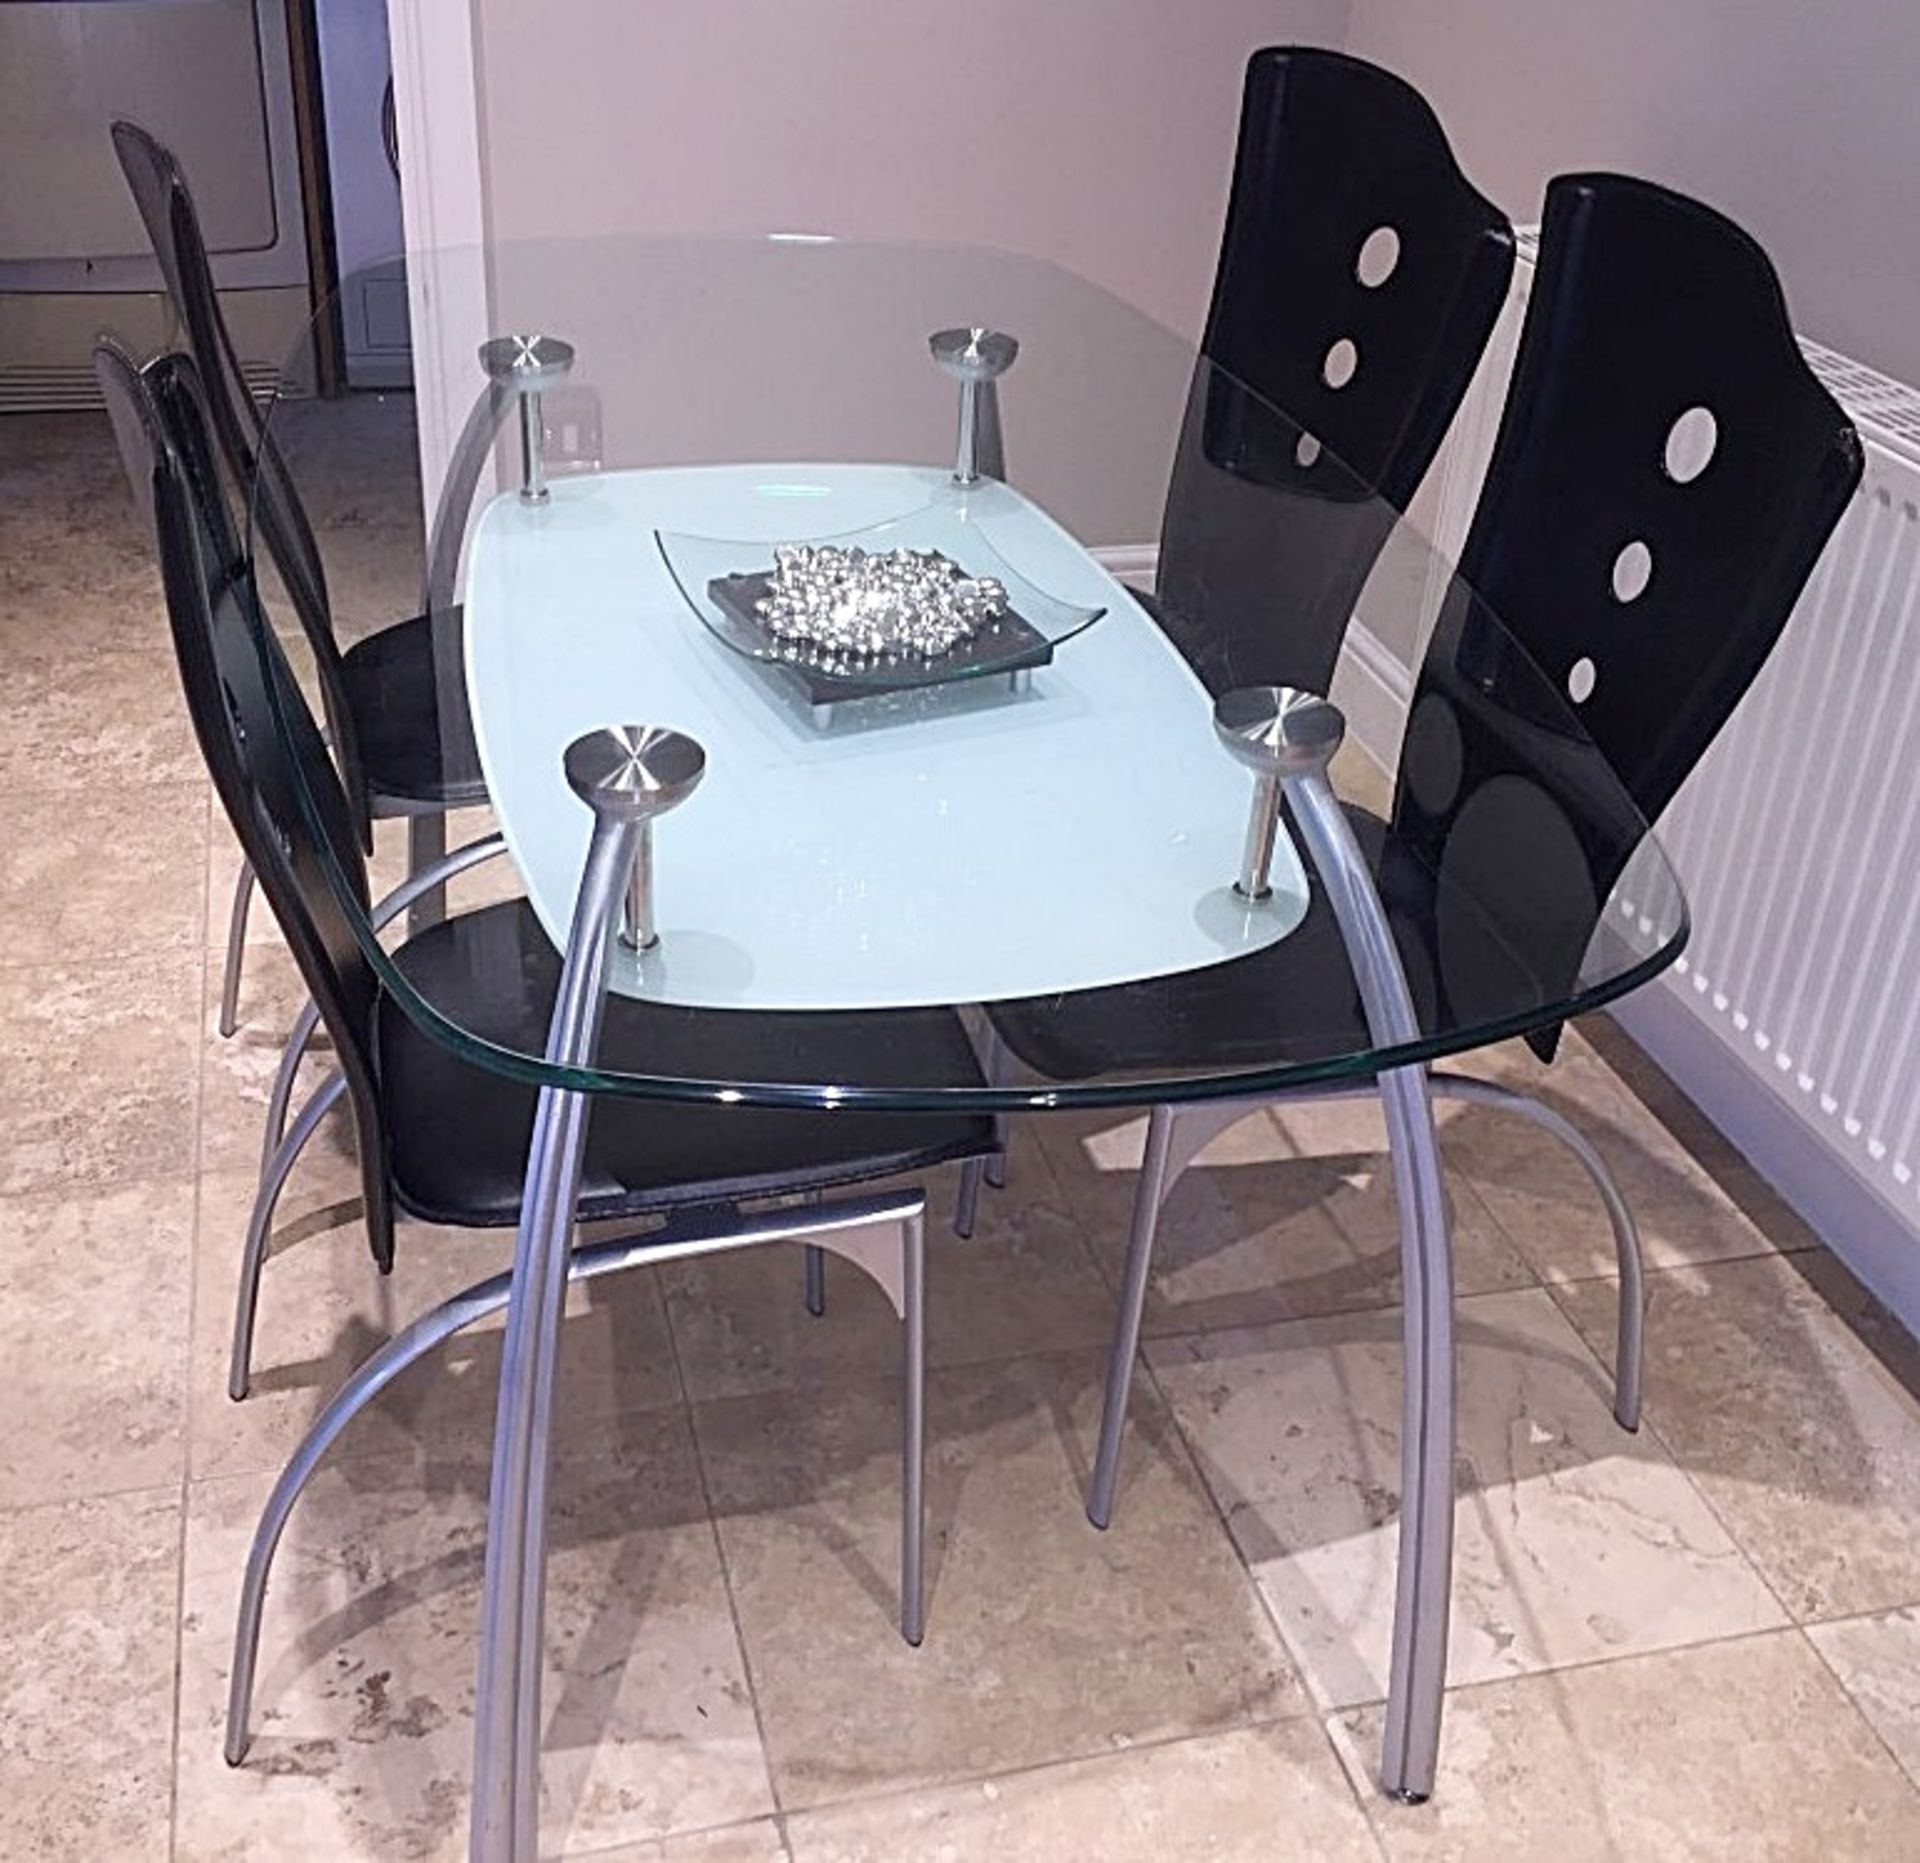 1 x Designer Glass-topped Dining Table And Chairs - Dimensions: 150cm x 84cm x Height 75cm Pls 4